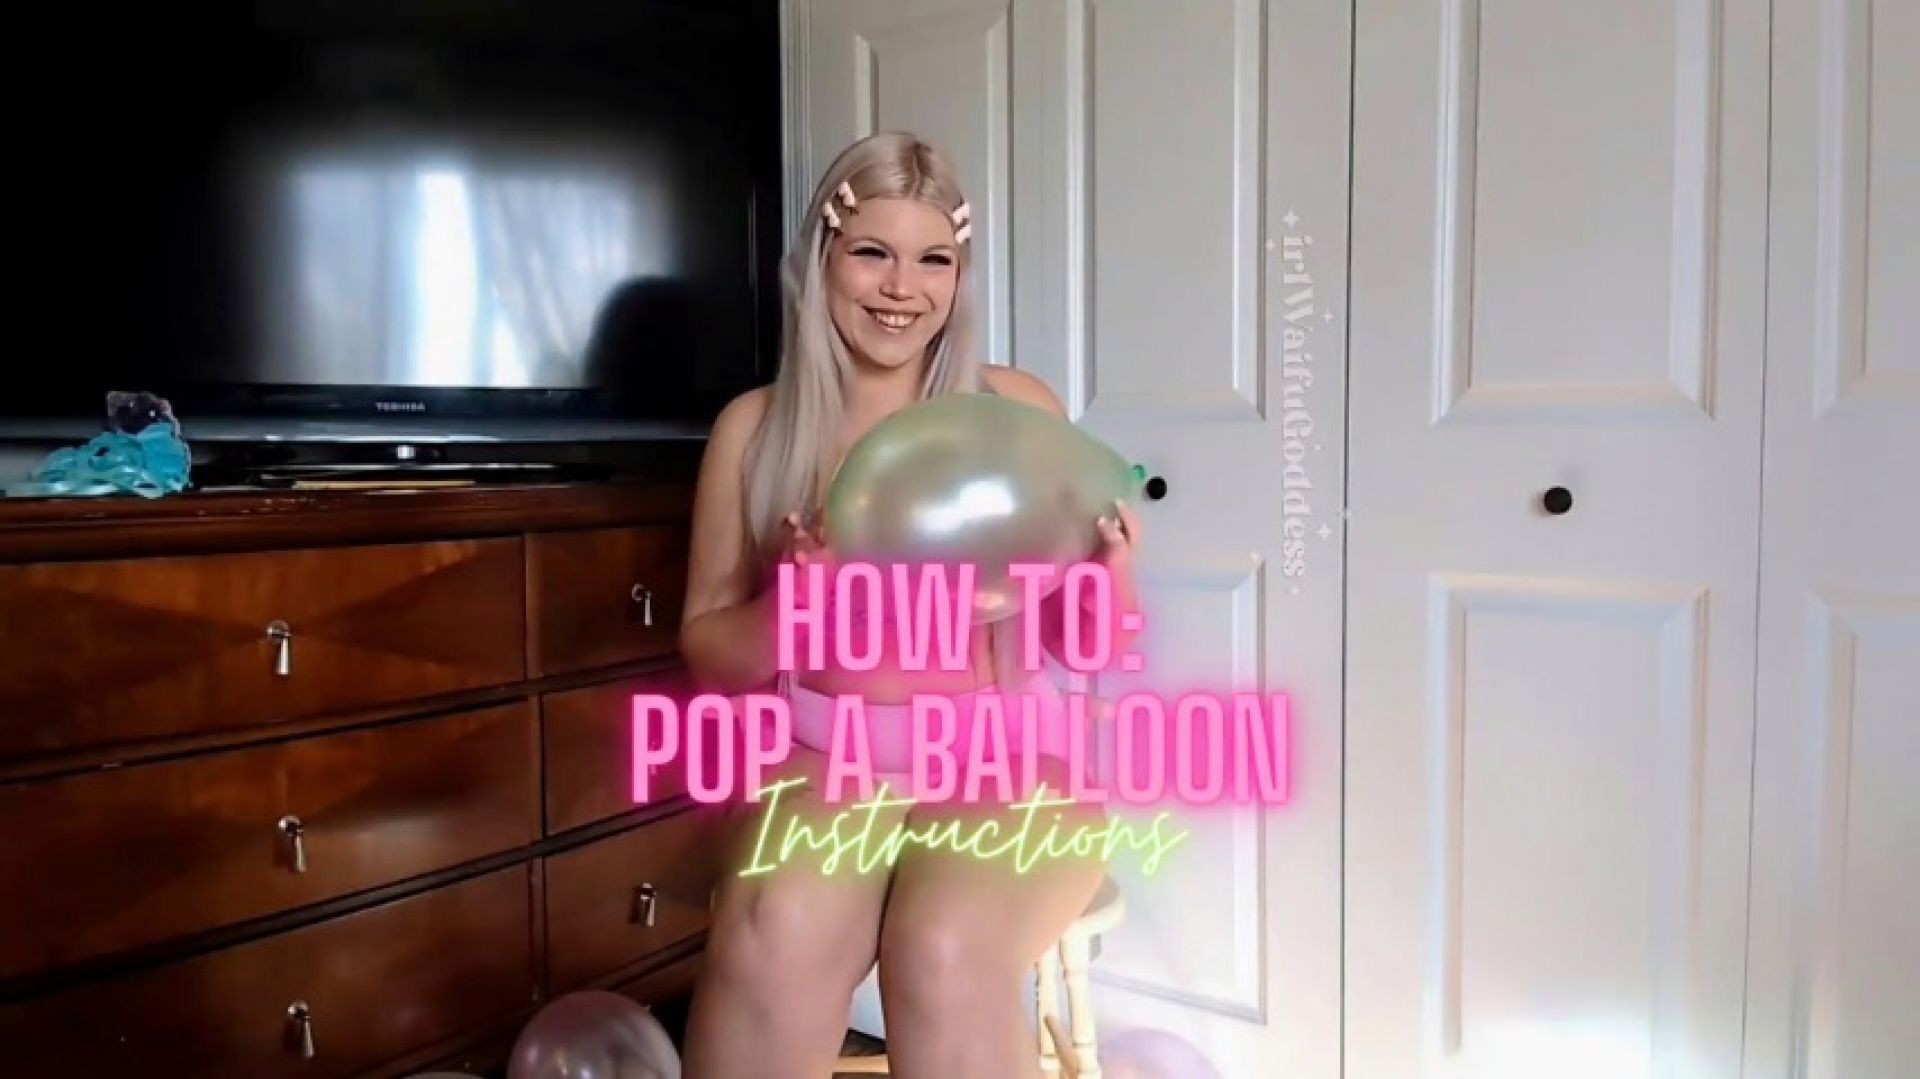 How To Pop a Balloon Instructions